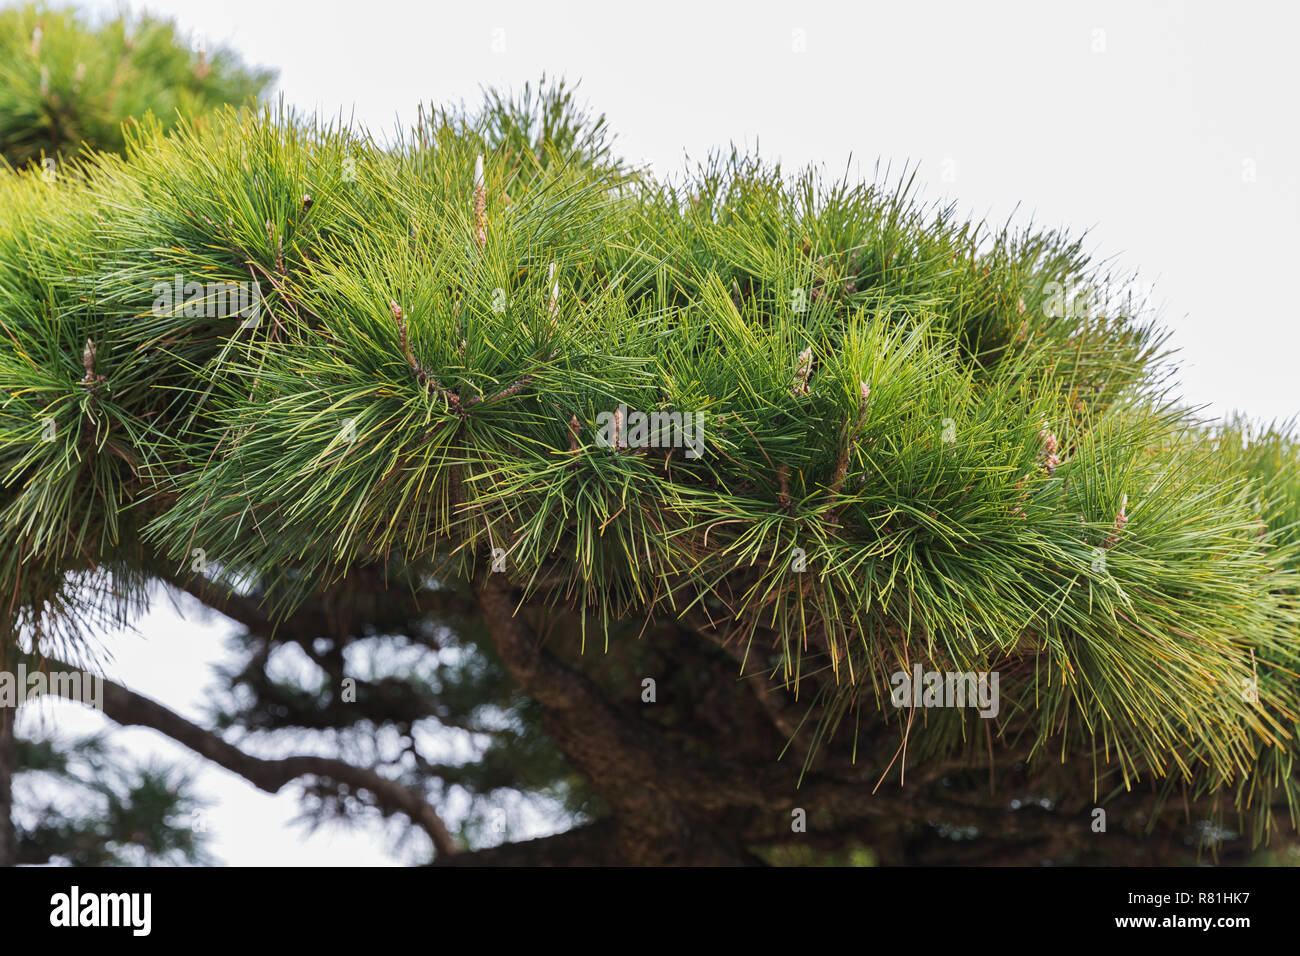 close up of green pine tree branch Stock Photo